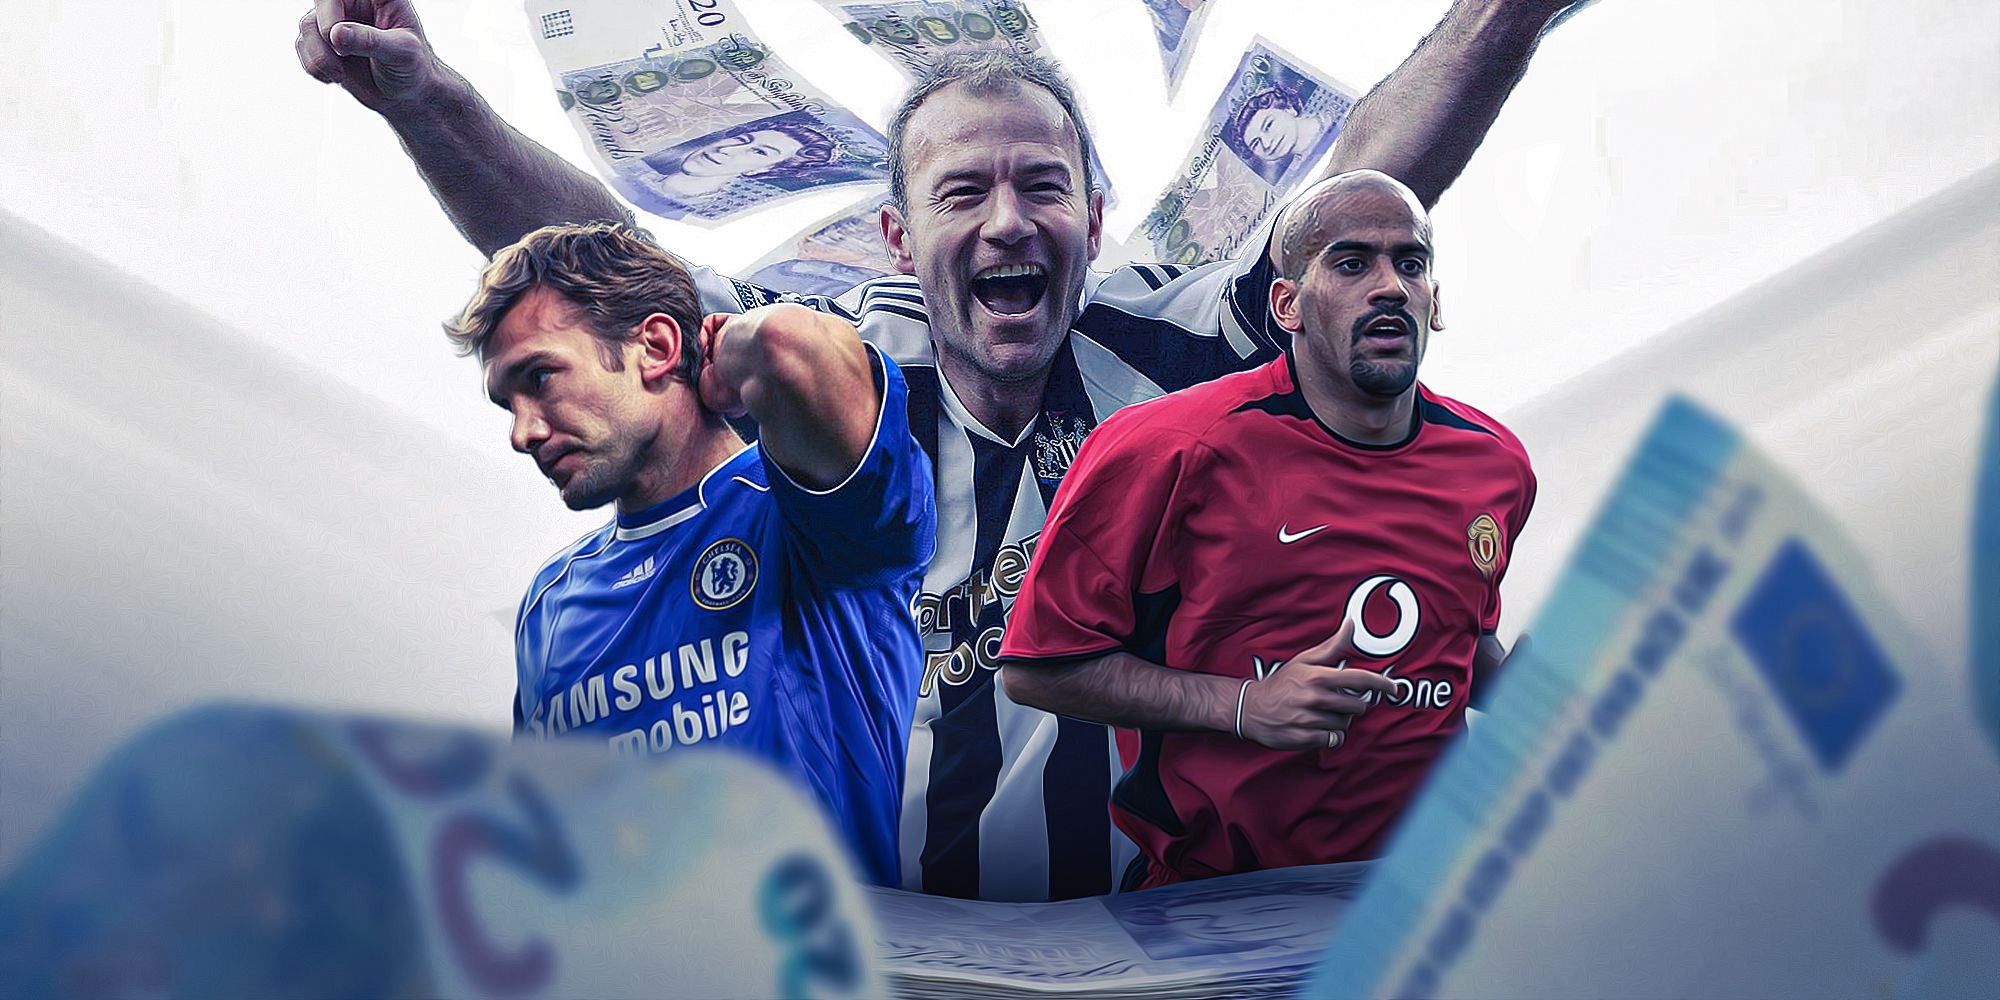 20 most expensive Premier League players ever based on inflation-adjusted fees